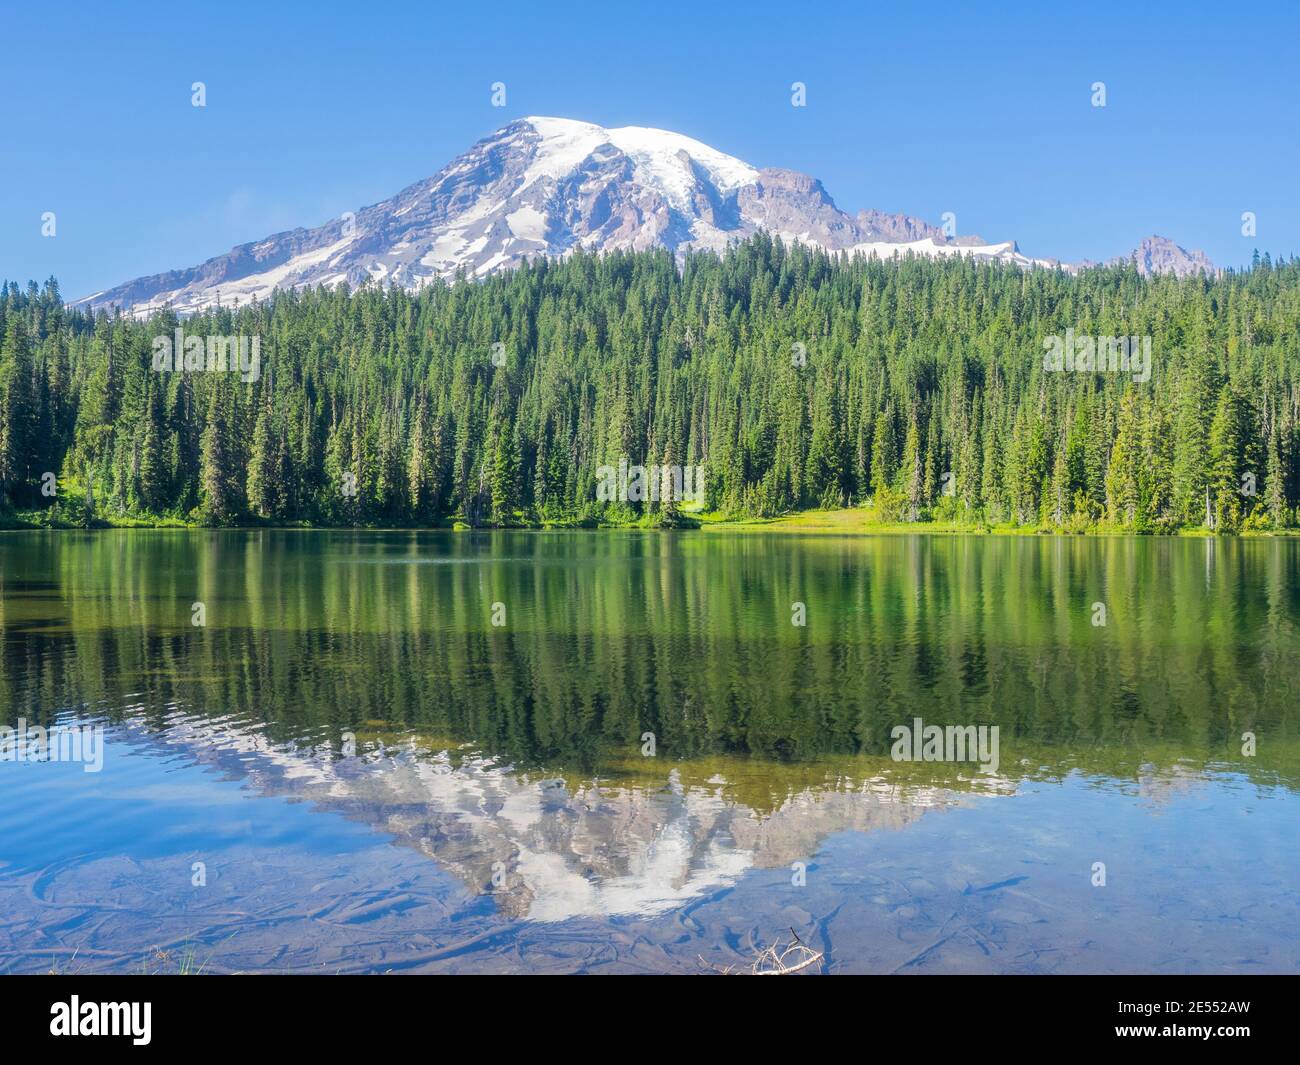 One of the most iconic views of Mt. Rainier in the park can be found at Reflection Lakes. Stock Photo